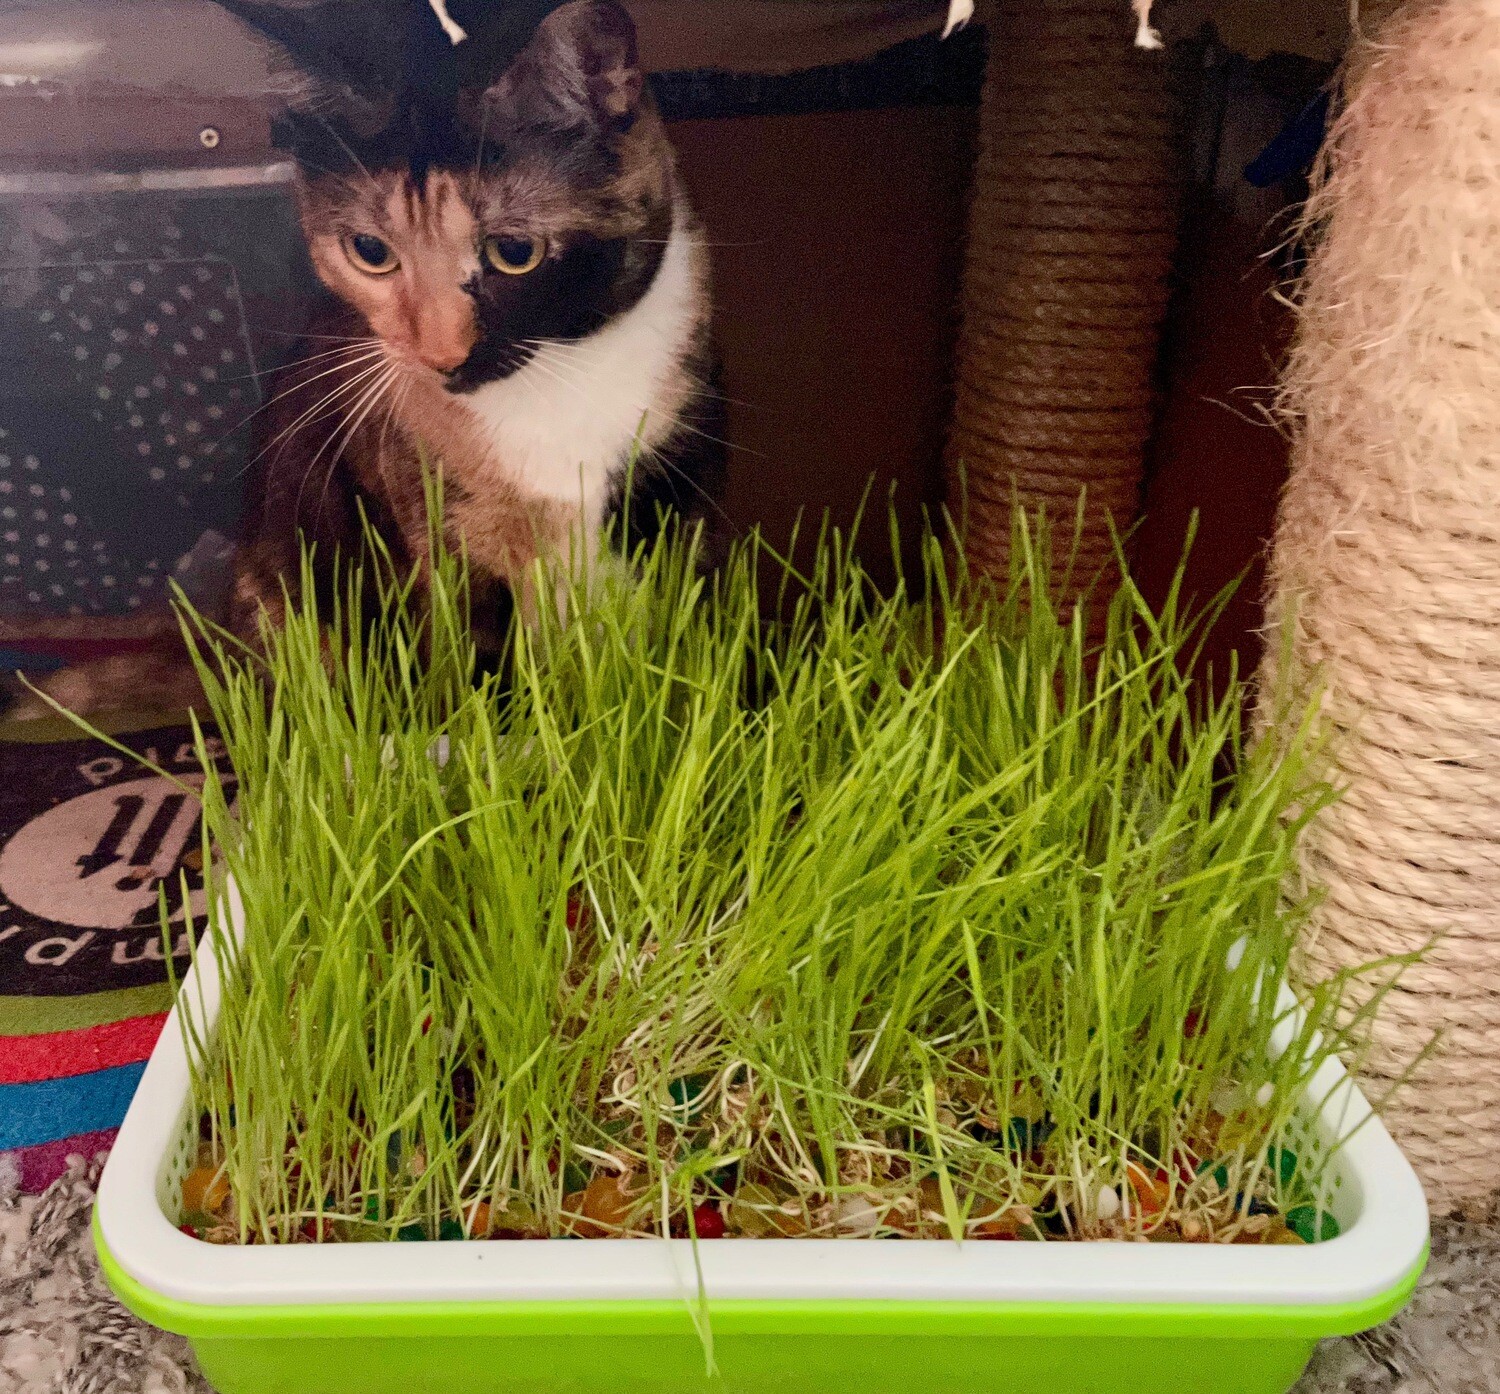 🐈 Organic All Natural Cat grass kit with sprouter tray with lid, wheatgrass seeds, water beads, easy to grow great for indoor and outdoor cats